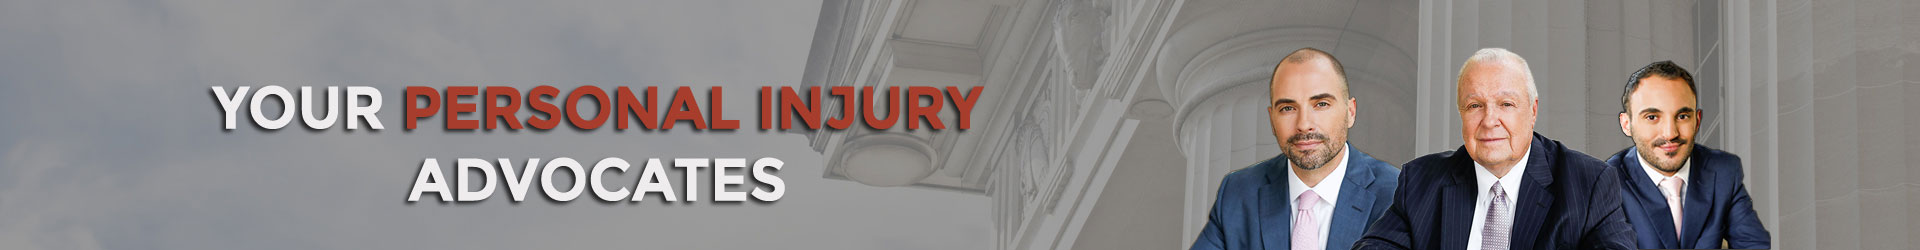 Trusted Personal Injury Attorneys Lake Charles, LA